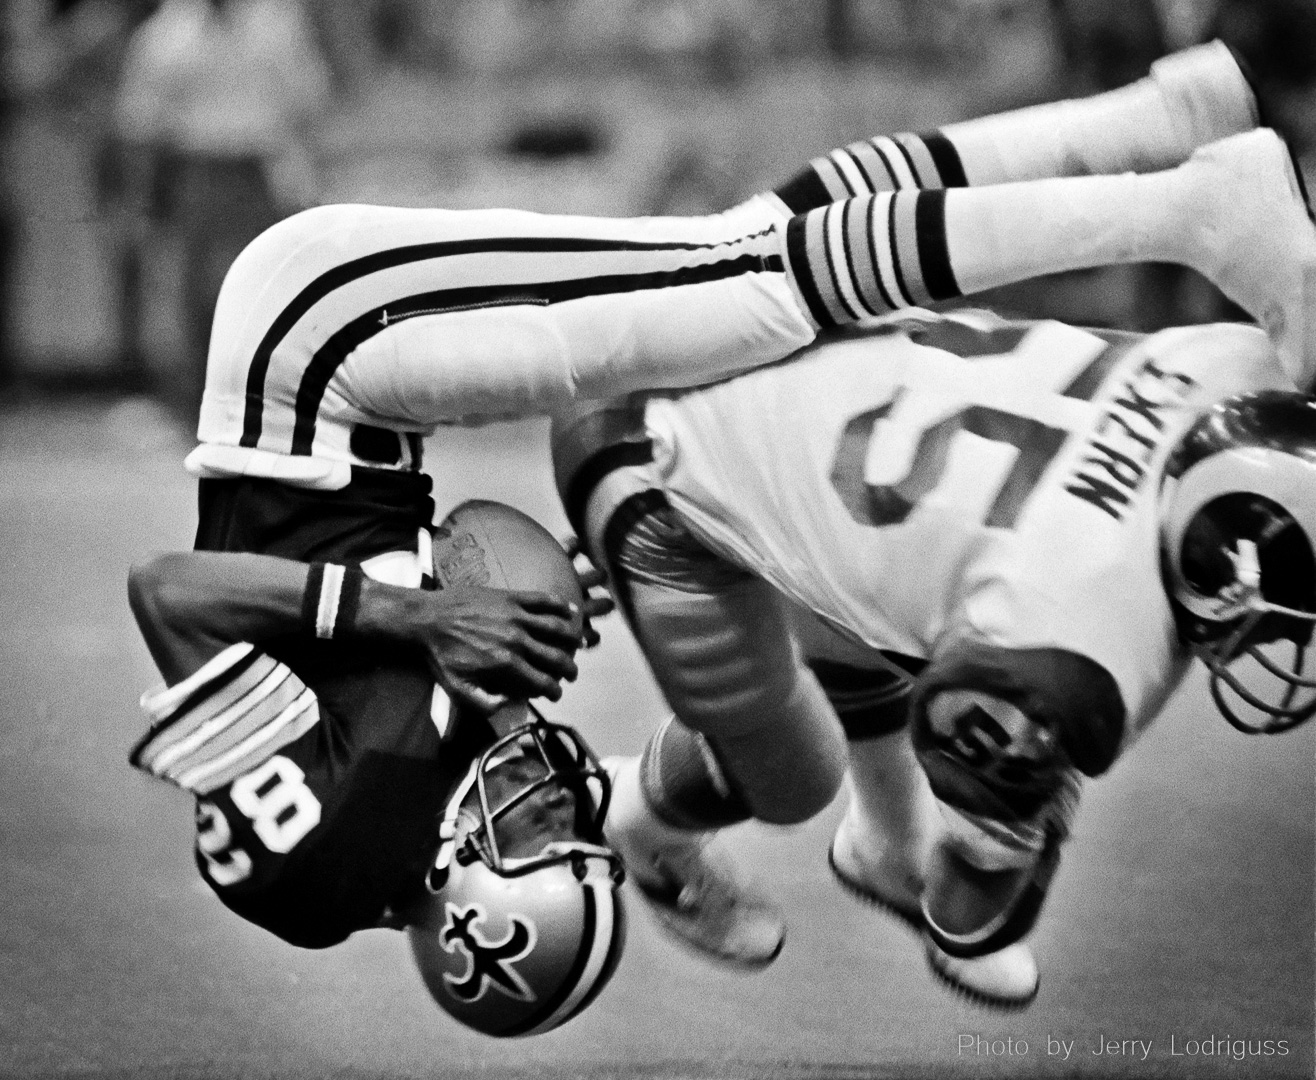 New Orleans Saints' Ike Harris flips upside down but holds on to the ball for a 16-yard gain during the fourth quarter of Saints - Rams game on November 25, 1980 in the Louisiana Superdome. The Rams' Carl Ekern made the hit on the play, and the Rams went on to win 27-7 as the Saints lost their 12th game.